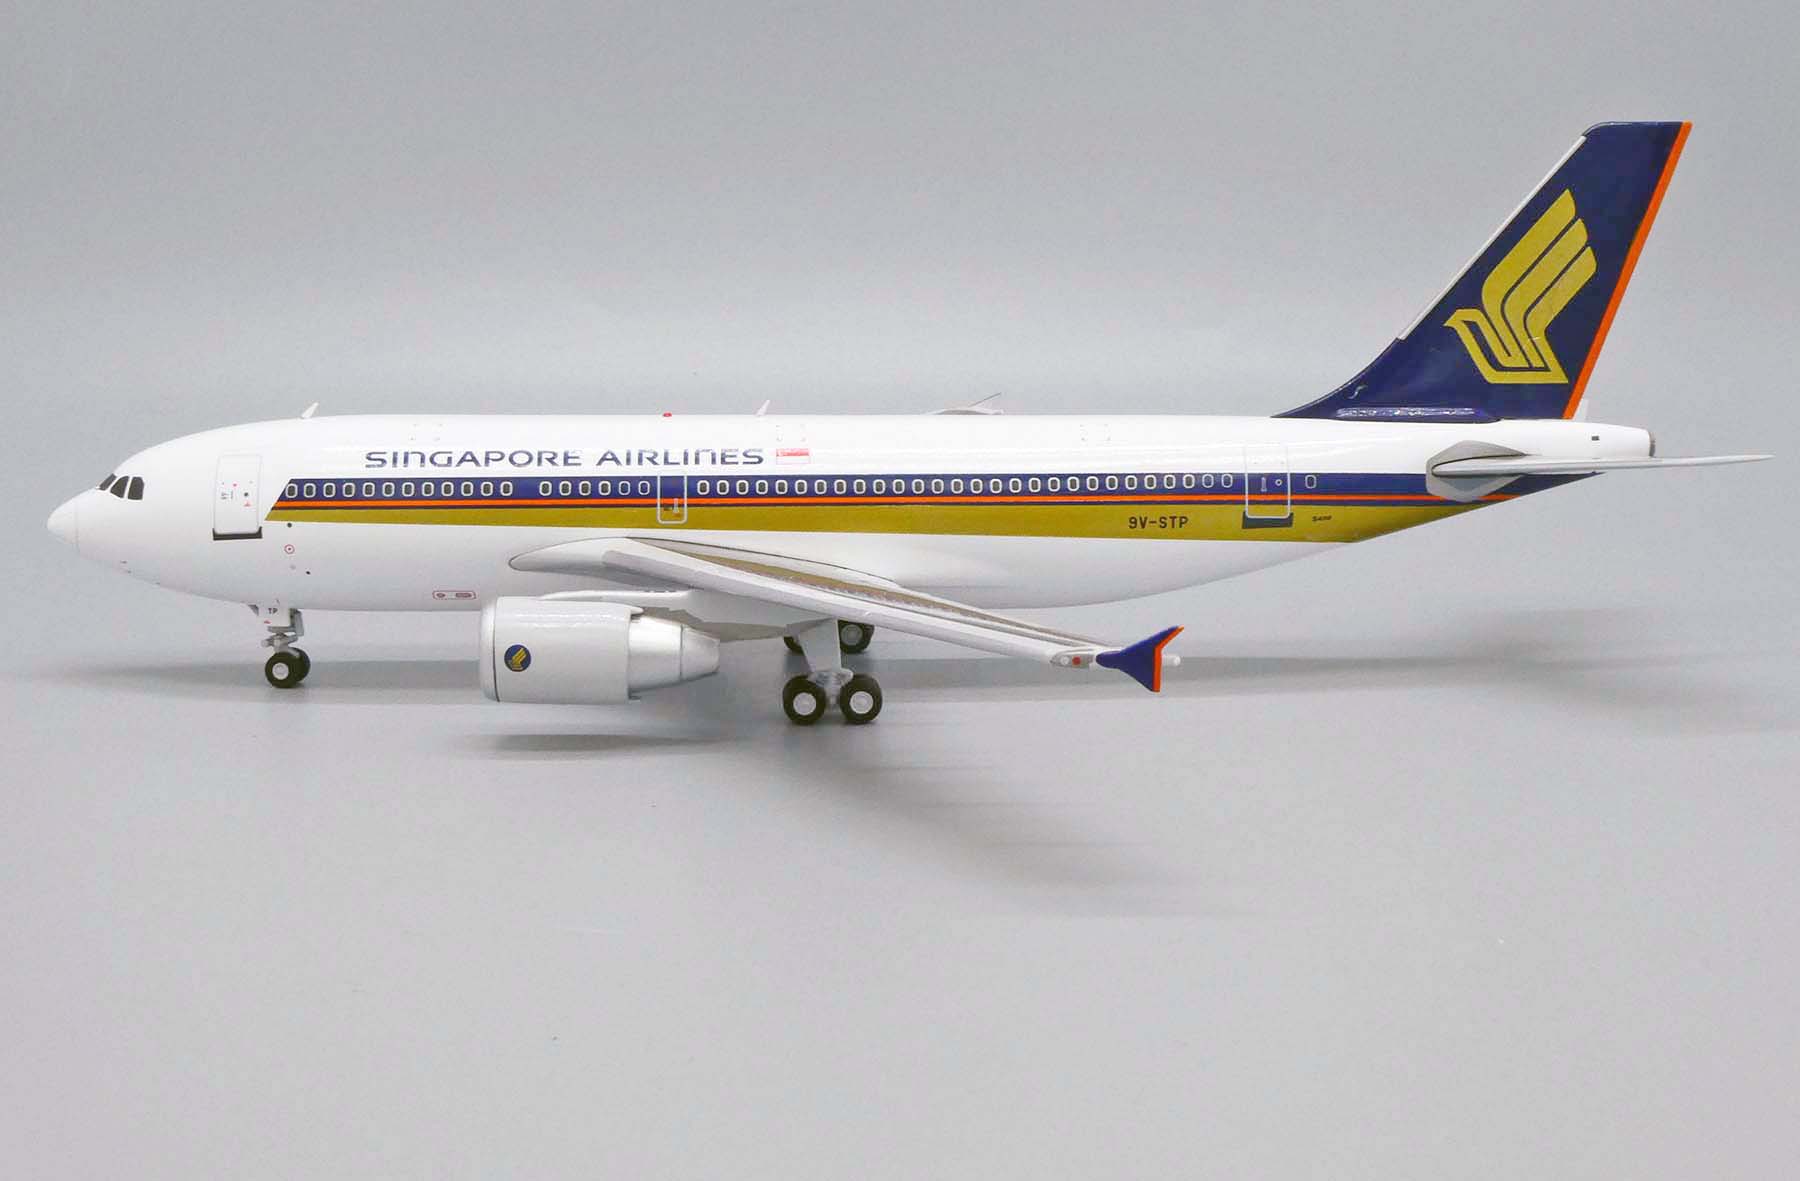 NEW 1:200 JC WINGS SINGAPORE AIRLINES AIRBUS A310-300 9V-STP MODEL EW2313001 